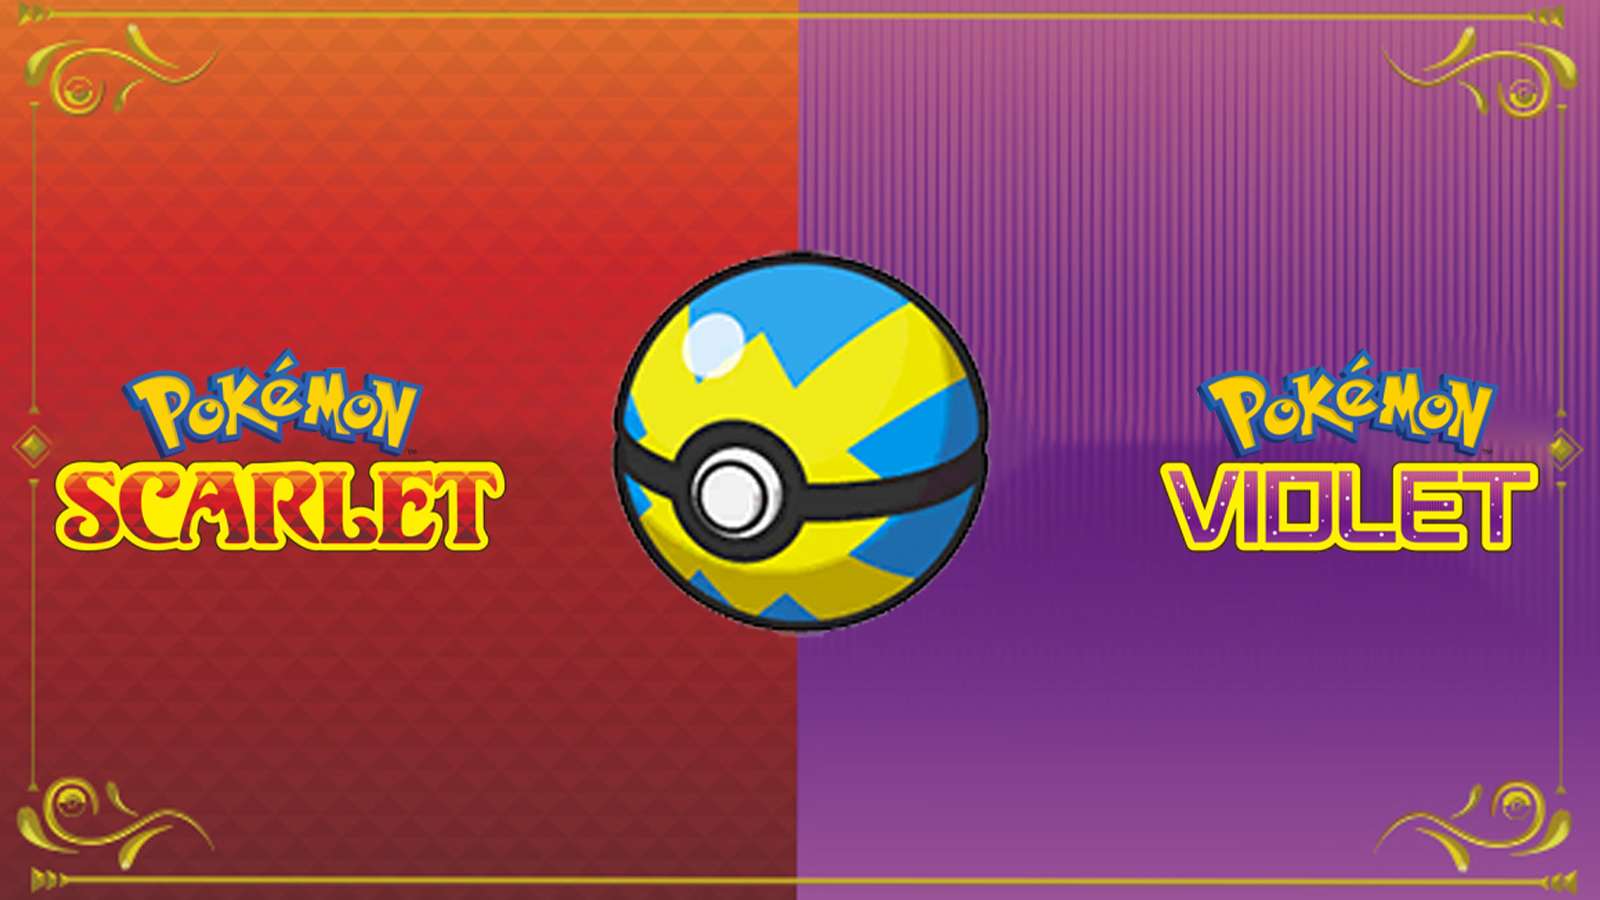 A Quick Ball in Pokemon Scarlet and Violet